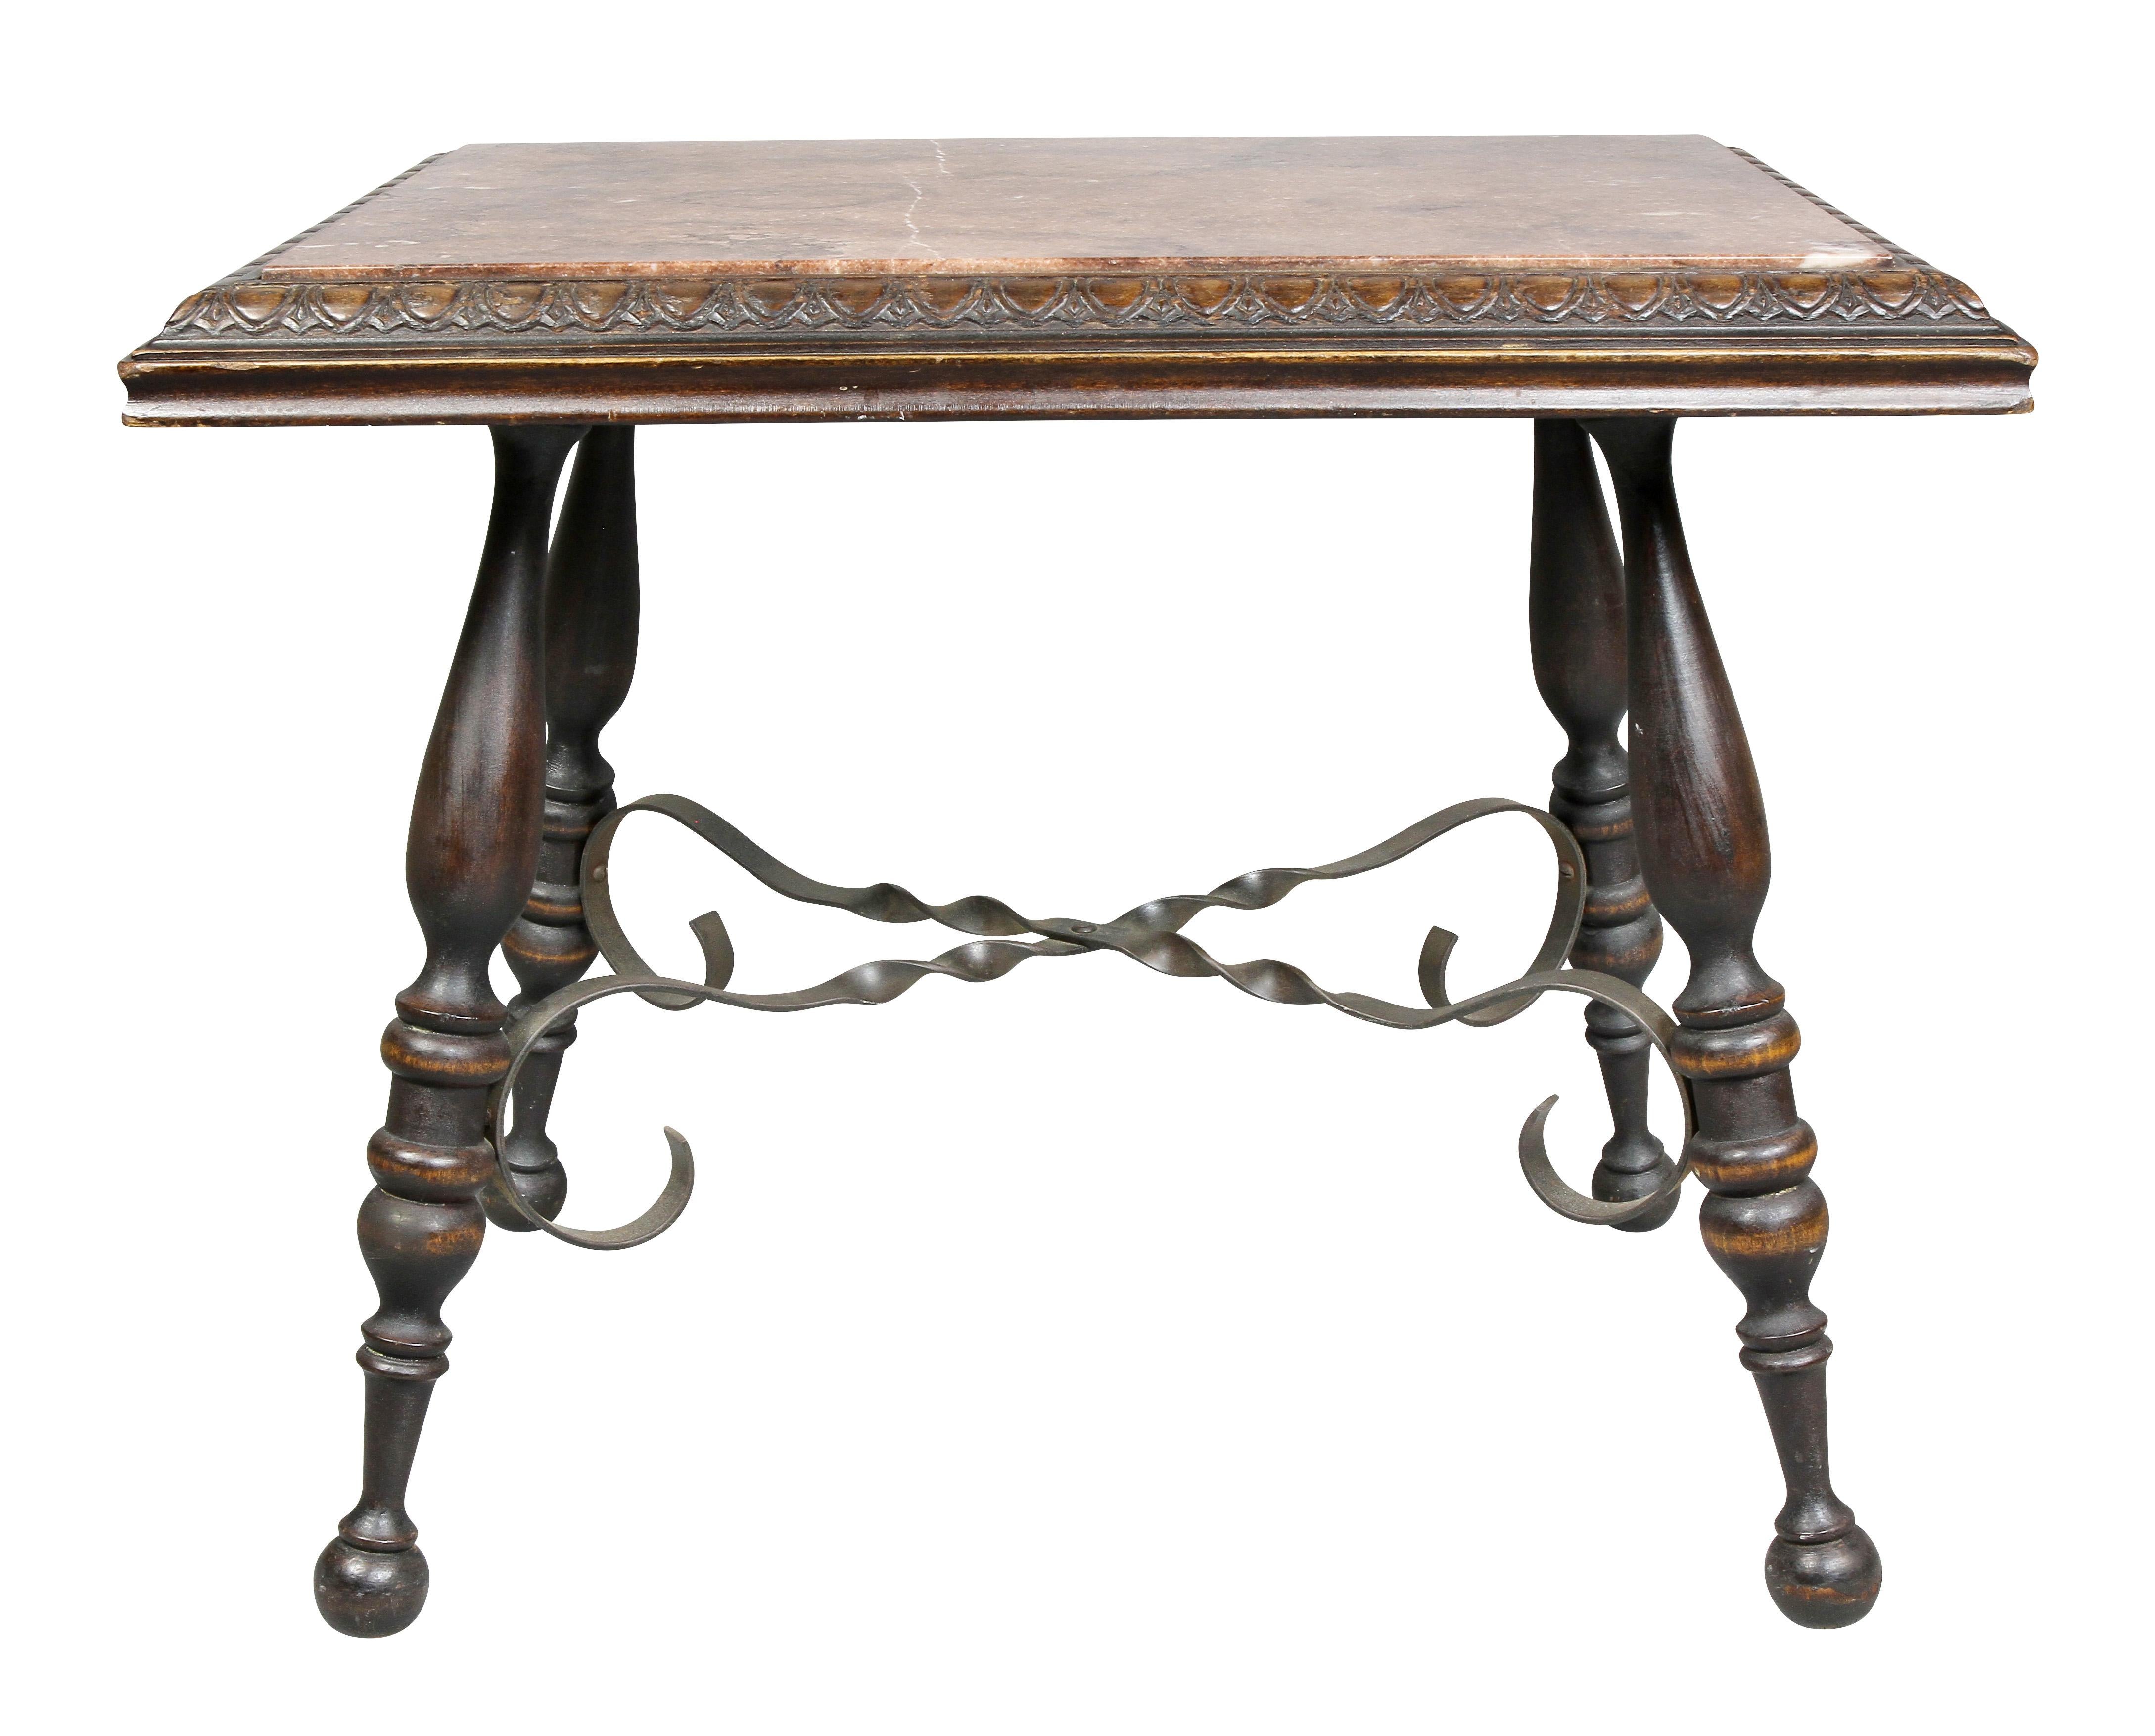 With inset marble top with carved egg and dart border raised on turned legs and metal stretchers.